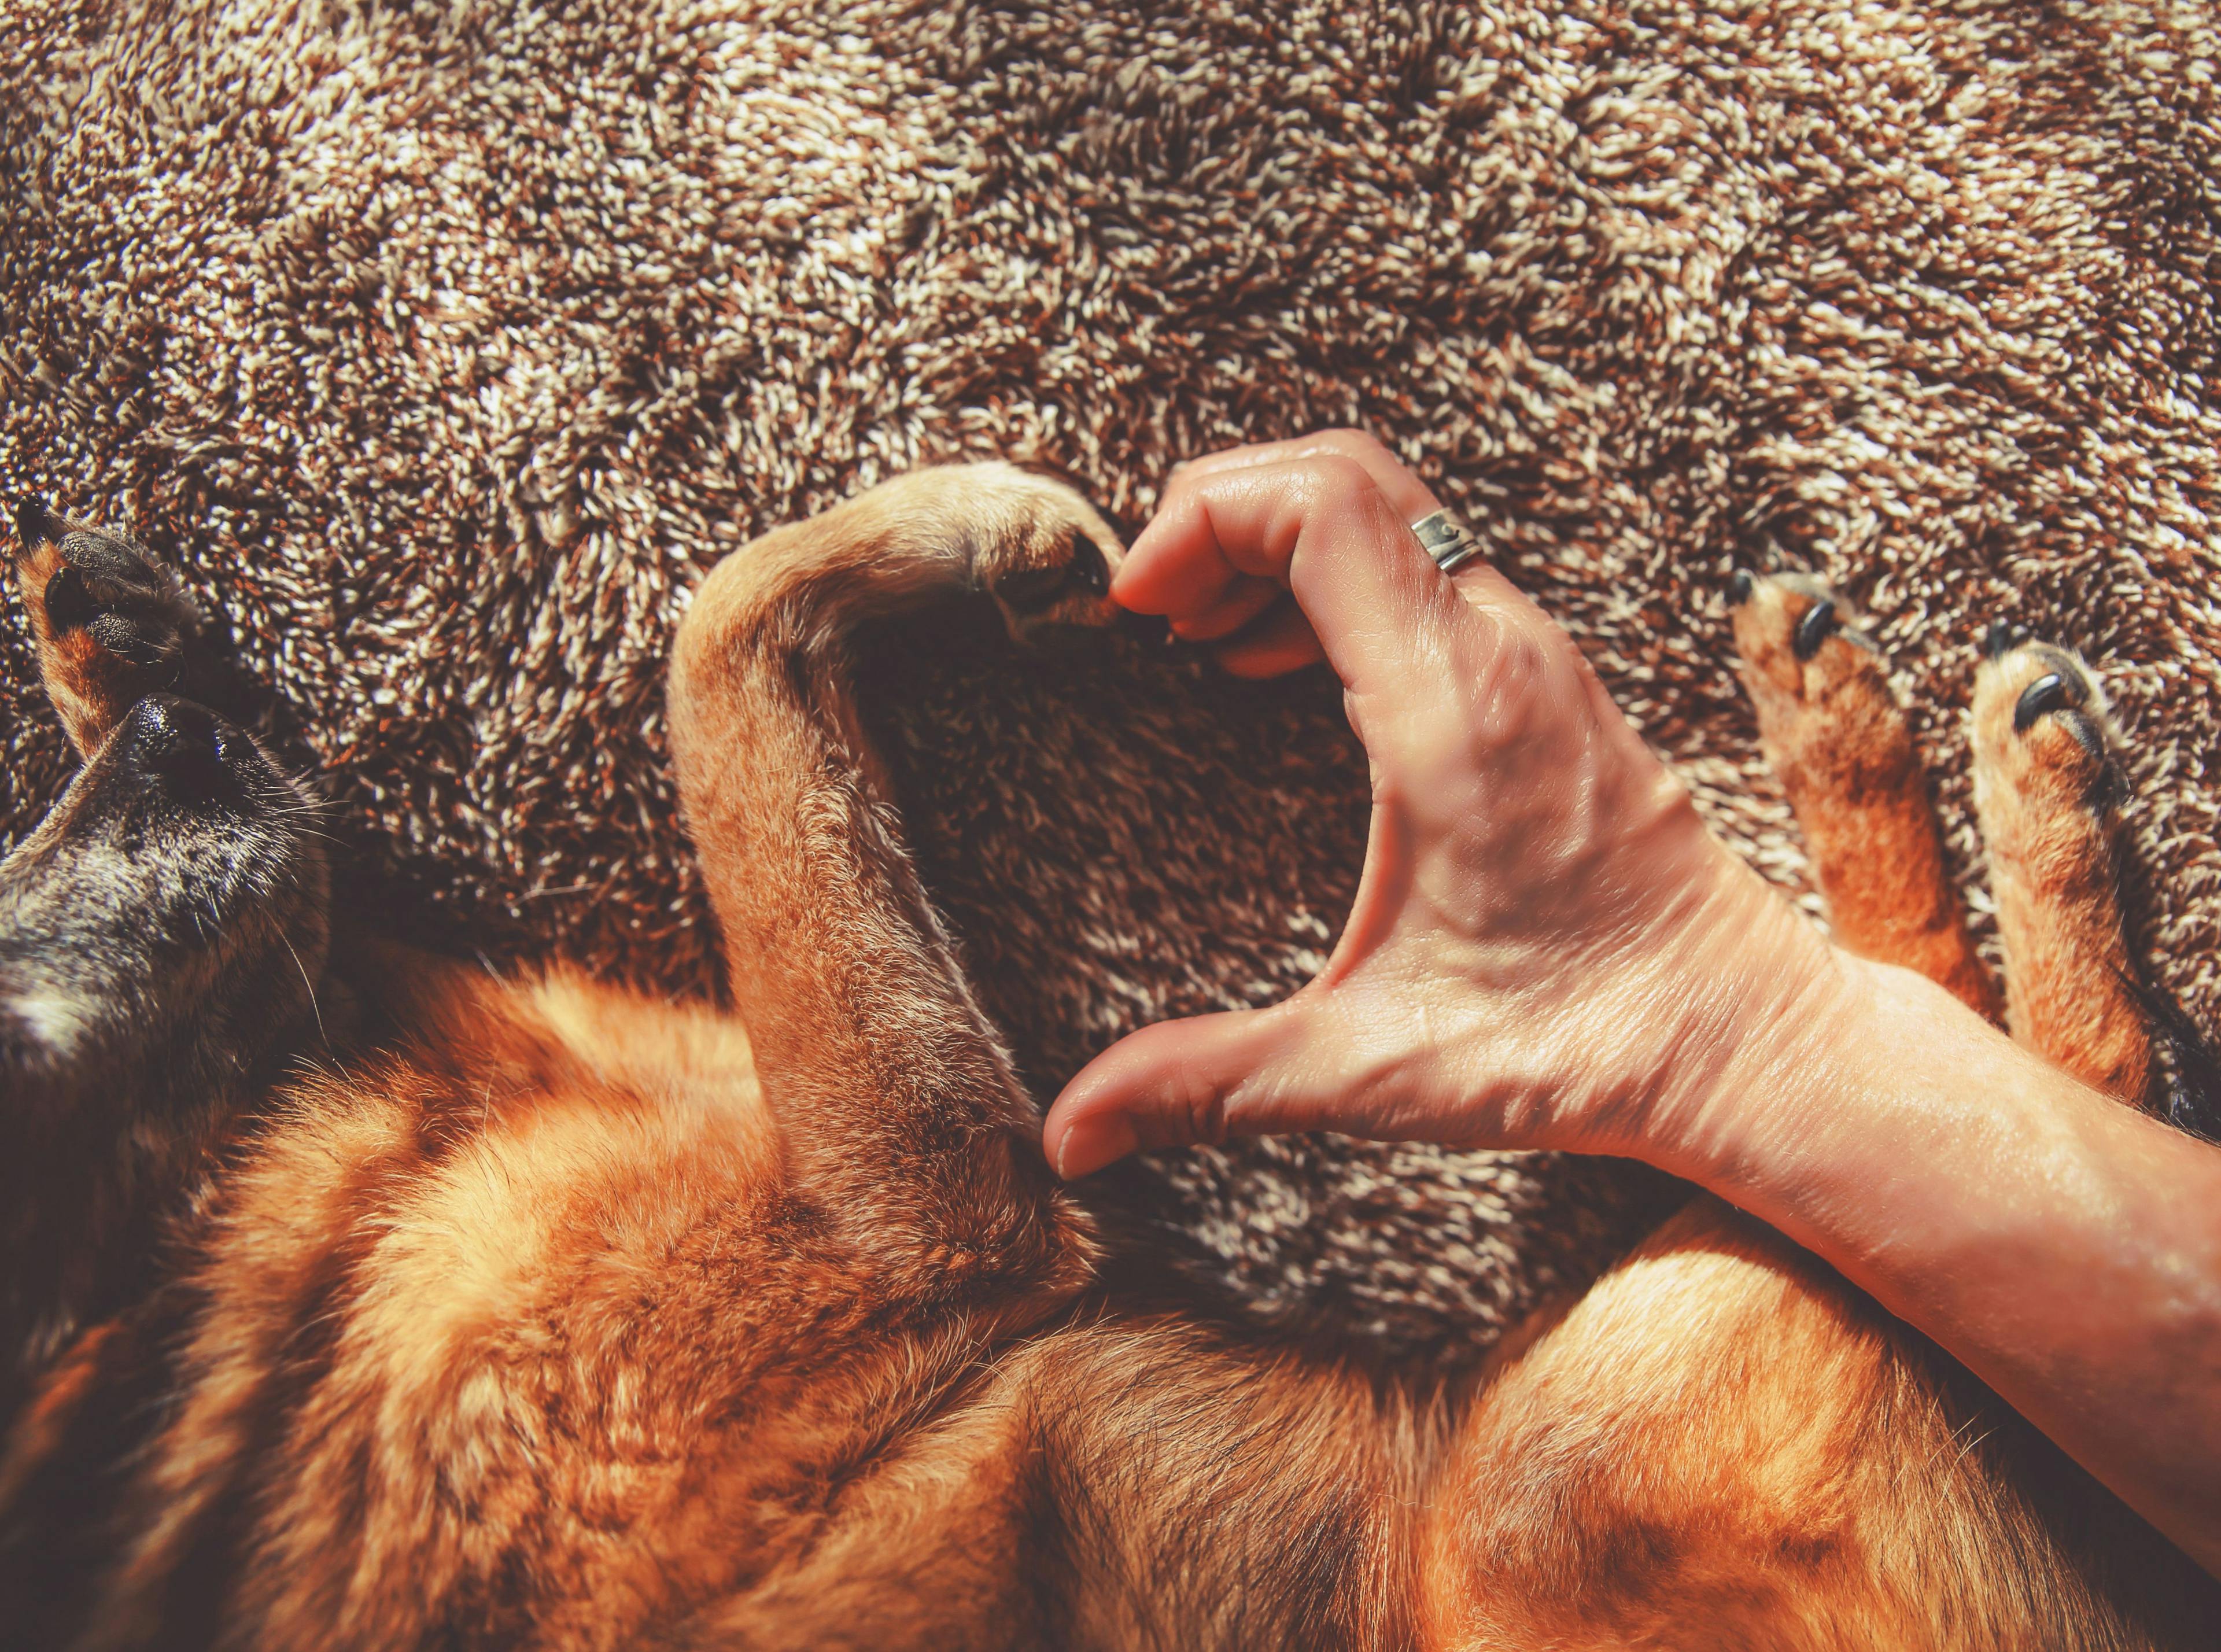 dog paw and human hand combine to form a heart